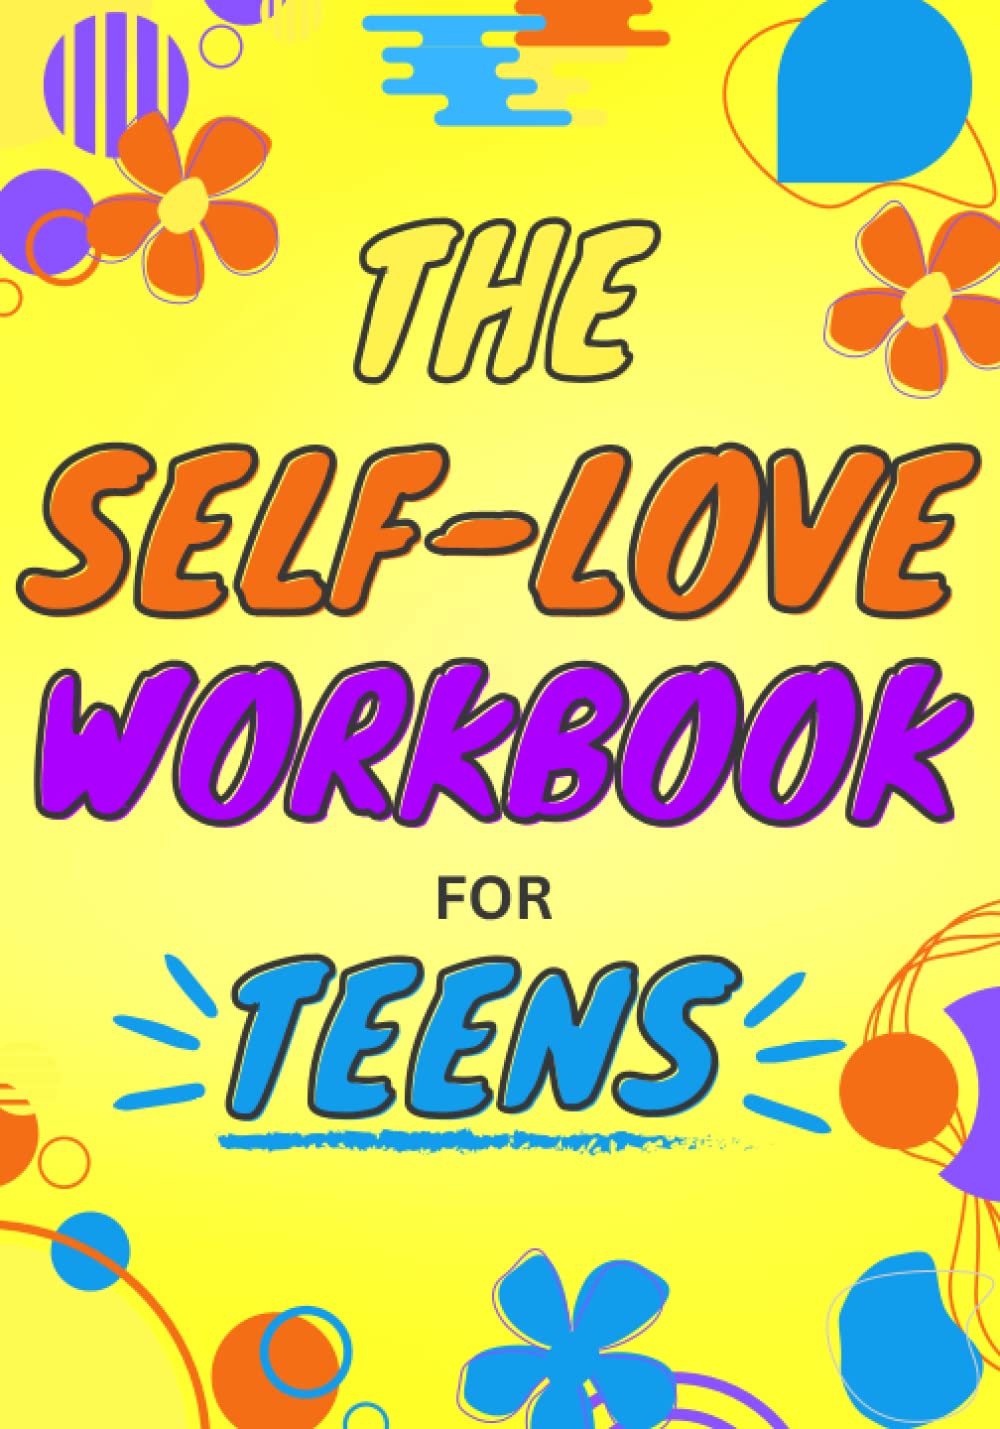 The Self-Love Workbook For Teens: Build Confidence, Eliminate Self-Doubt and Treat Yourself With Kindness (Life Skills for Teens)